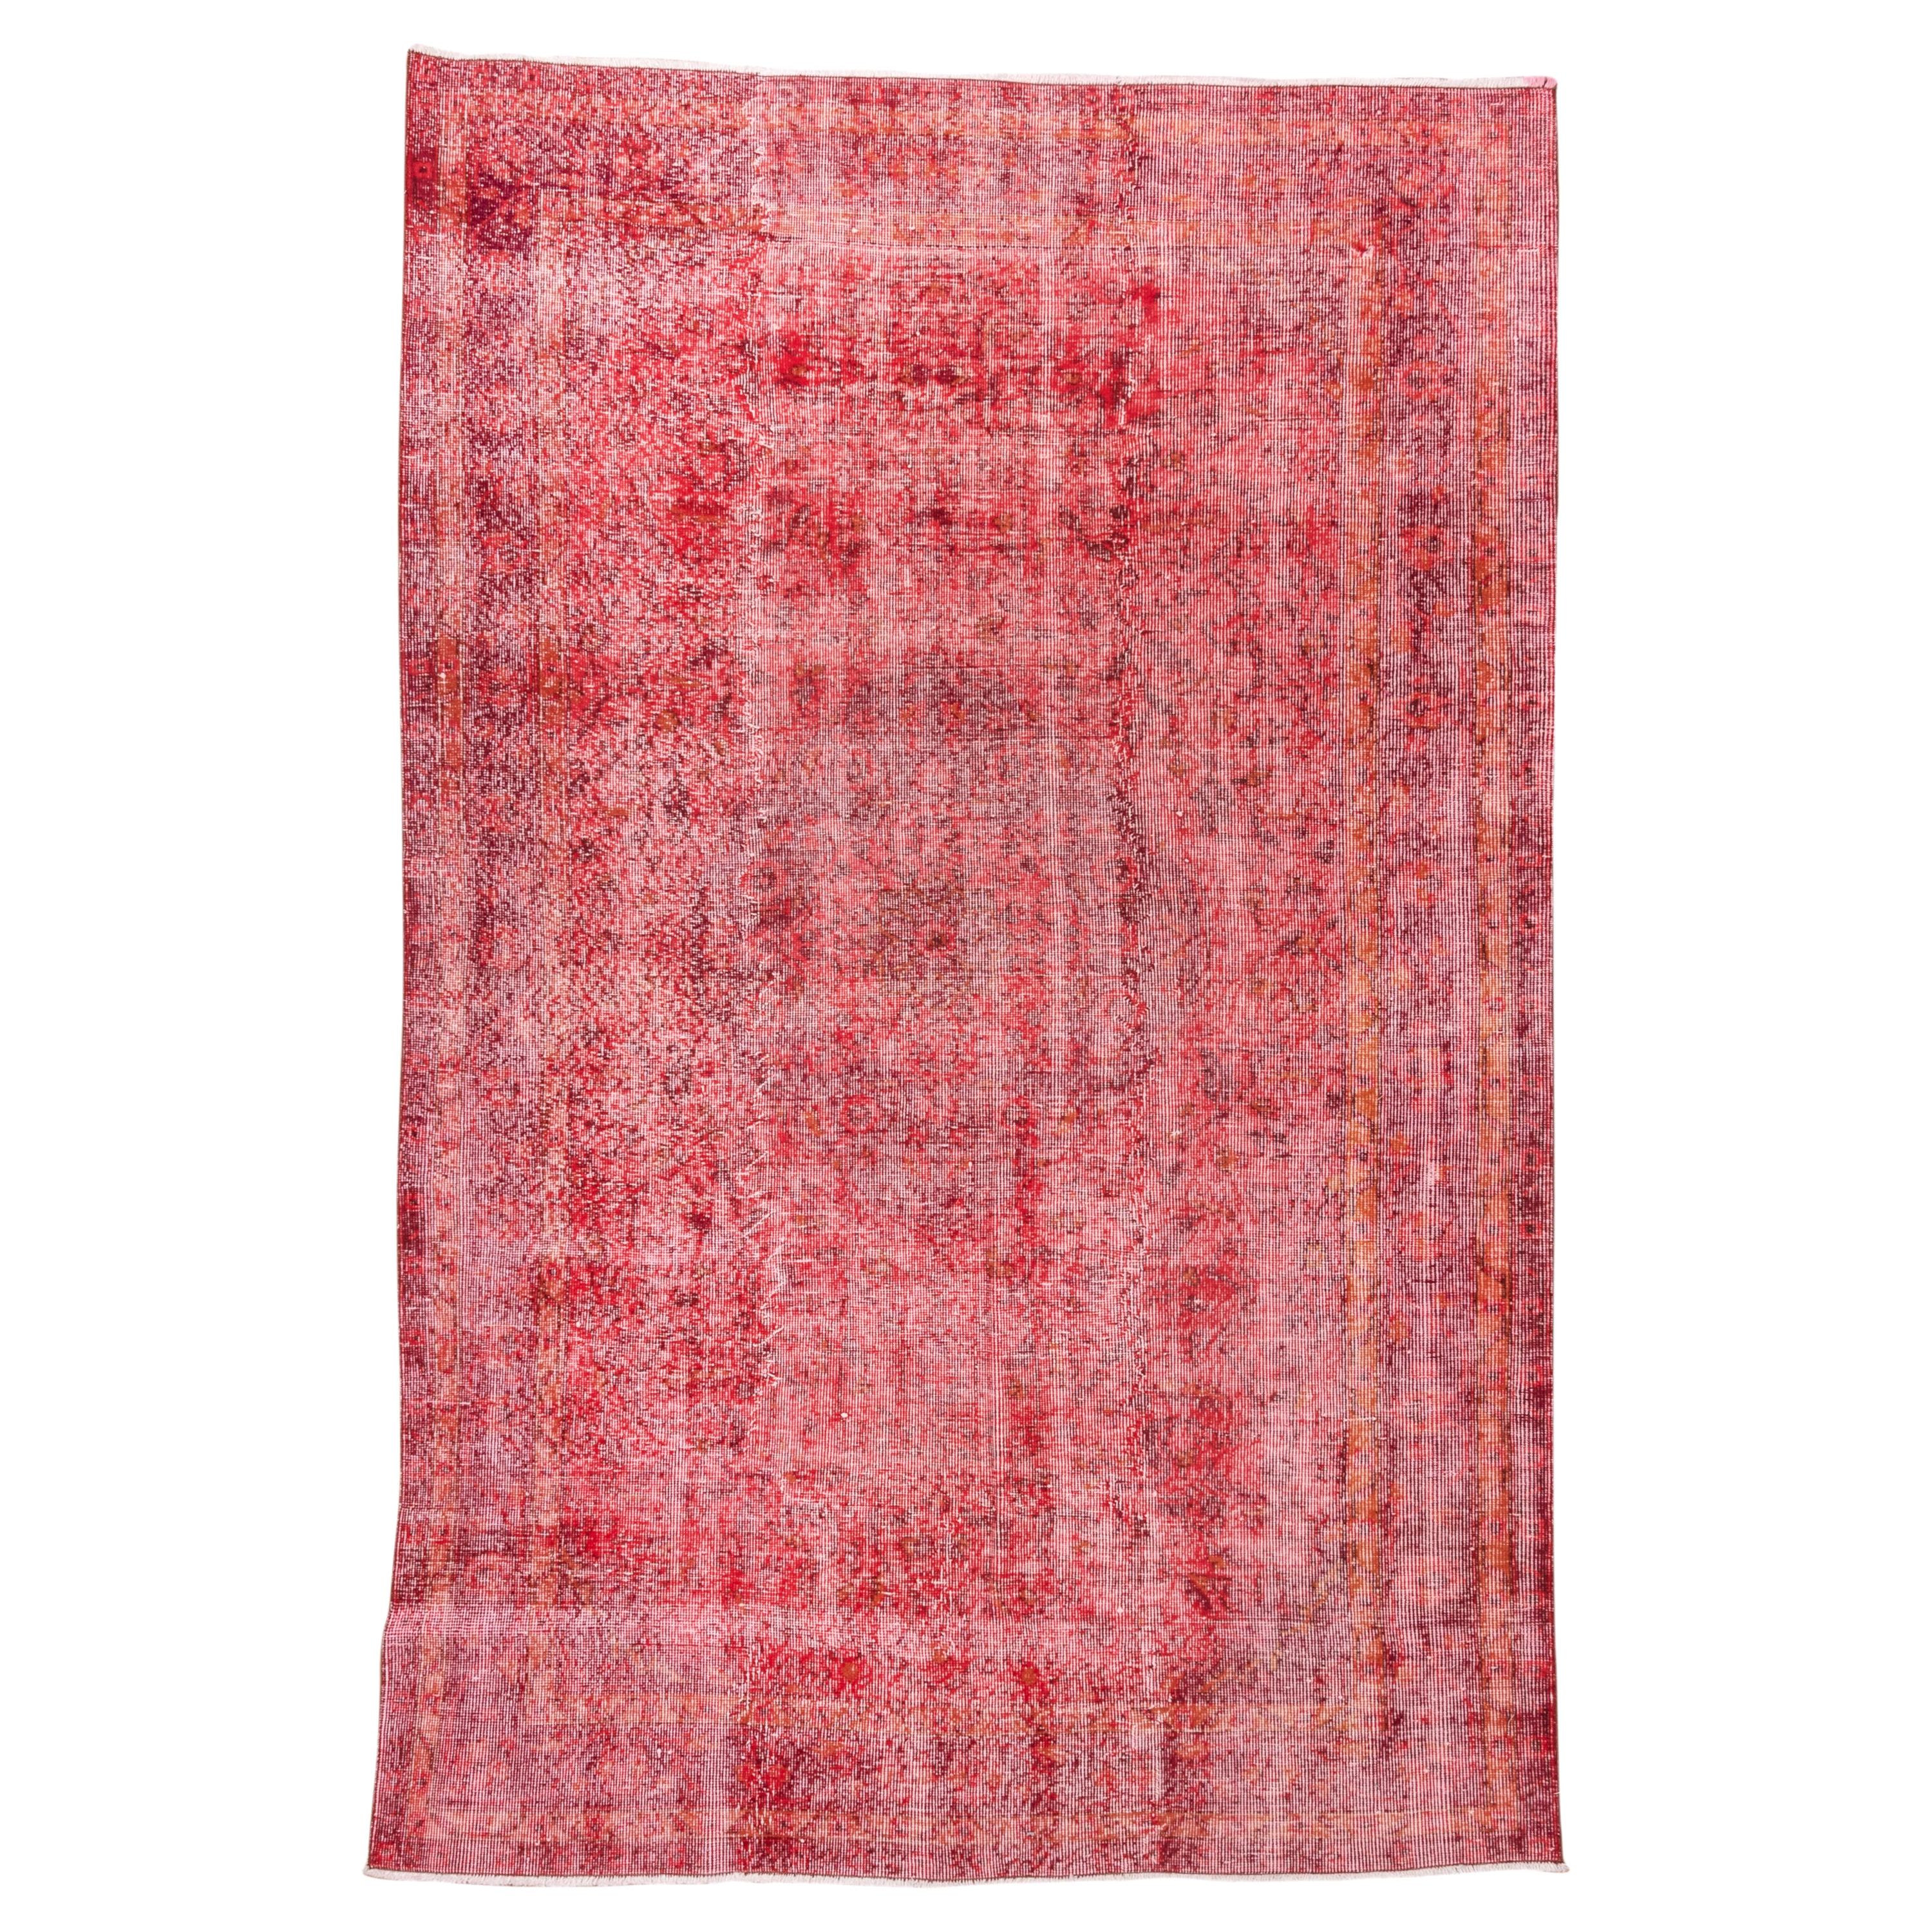 Vintage Red Overdyed Wool Rug, Shabby Chic